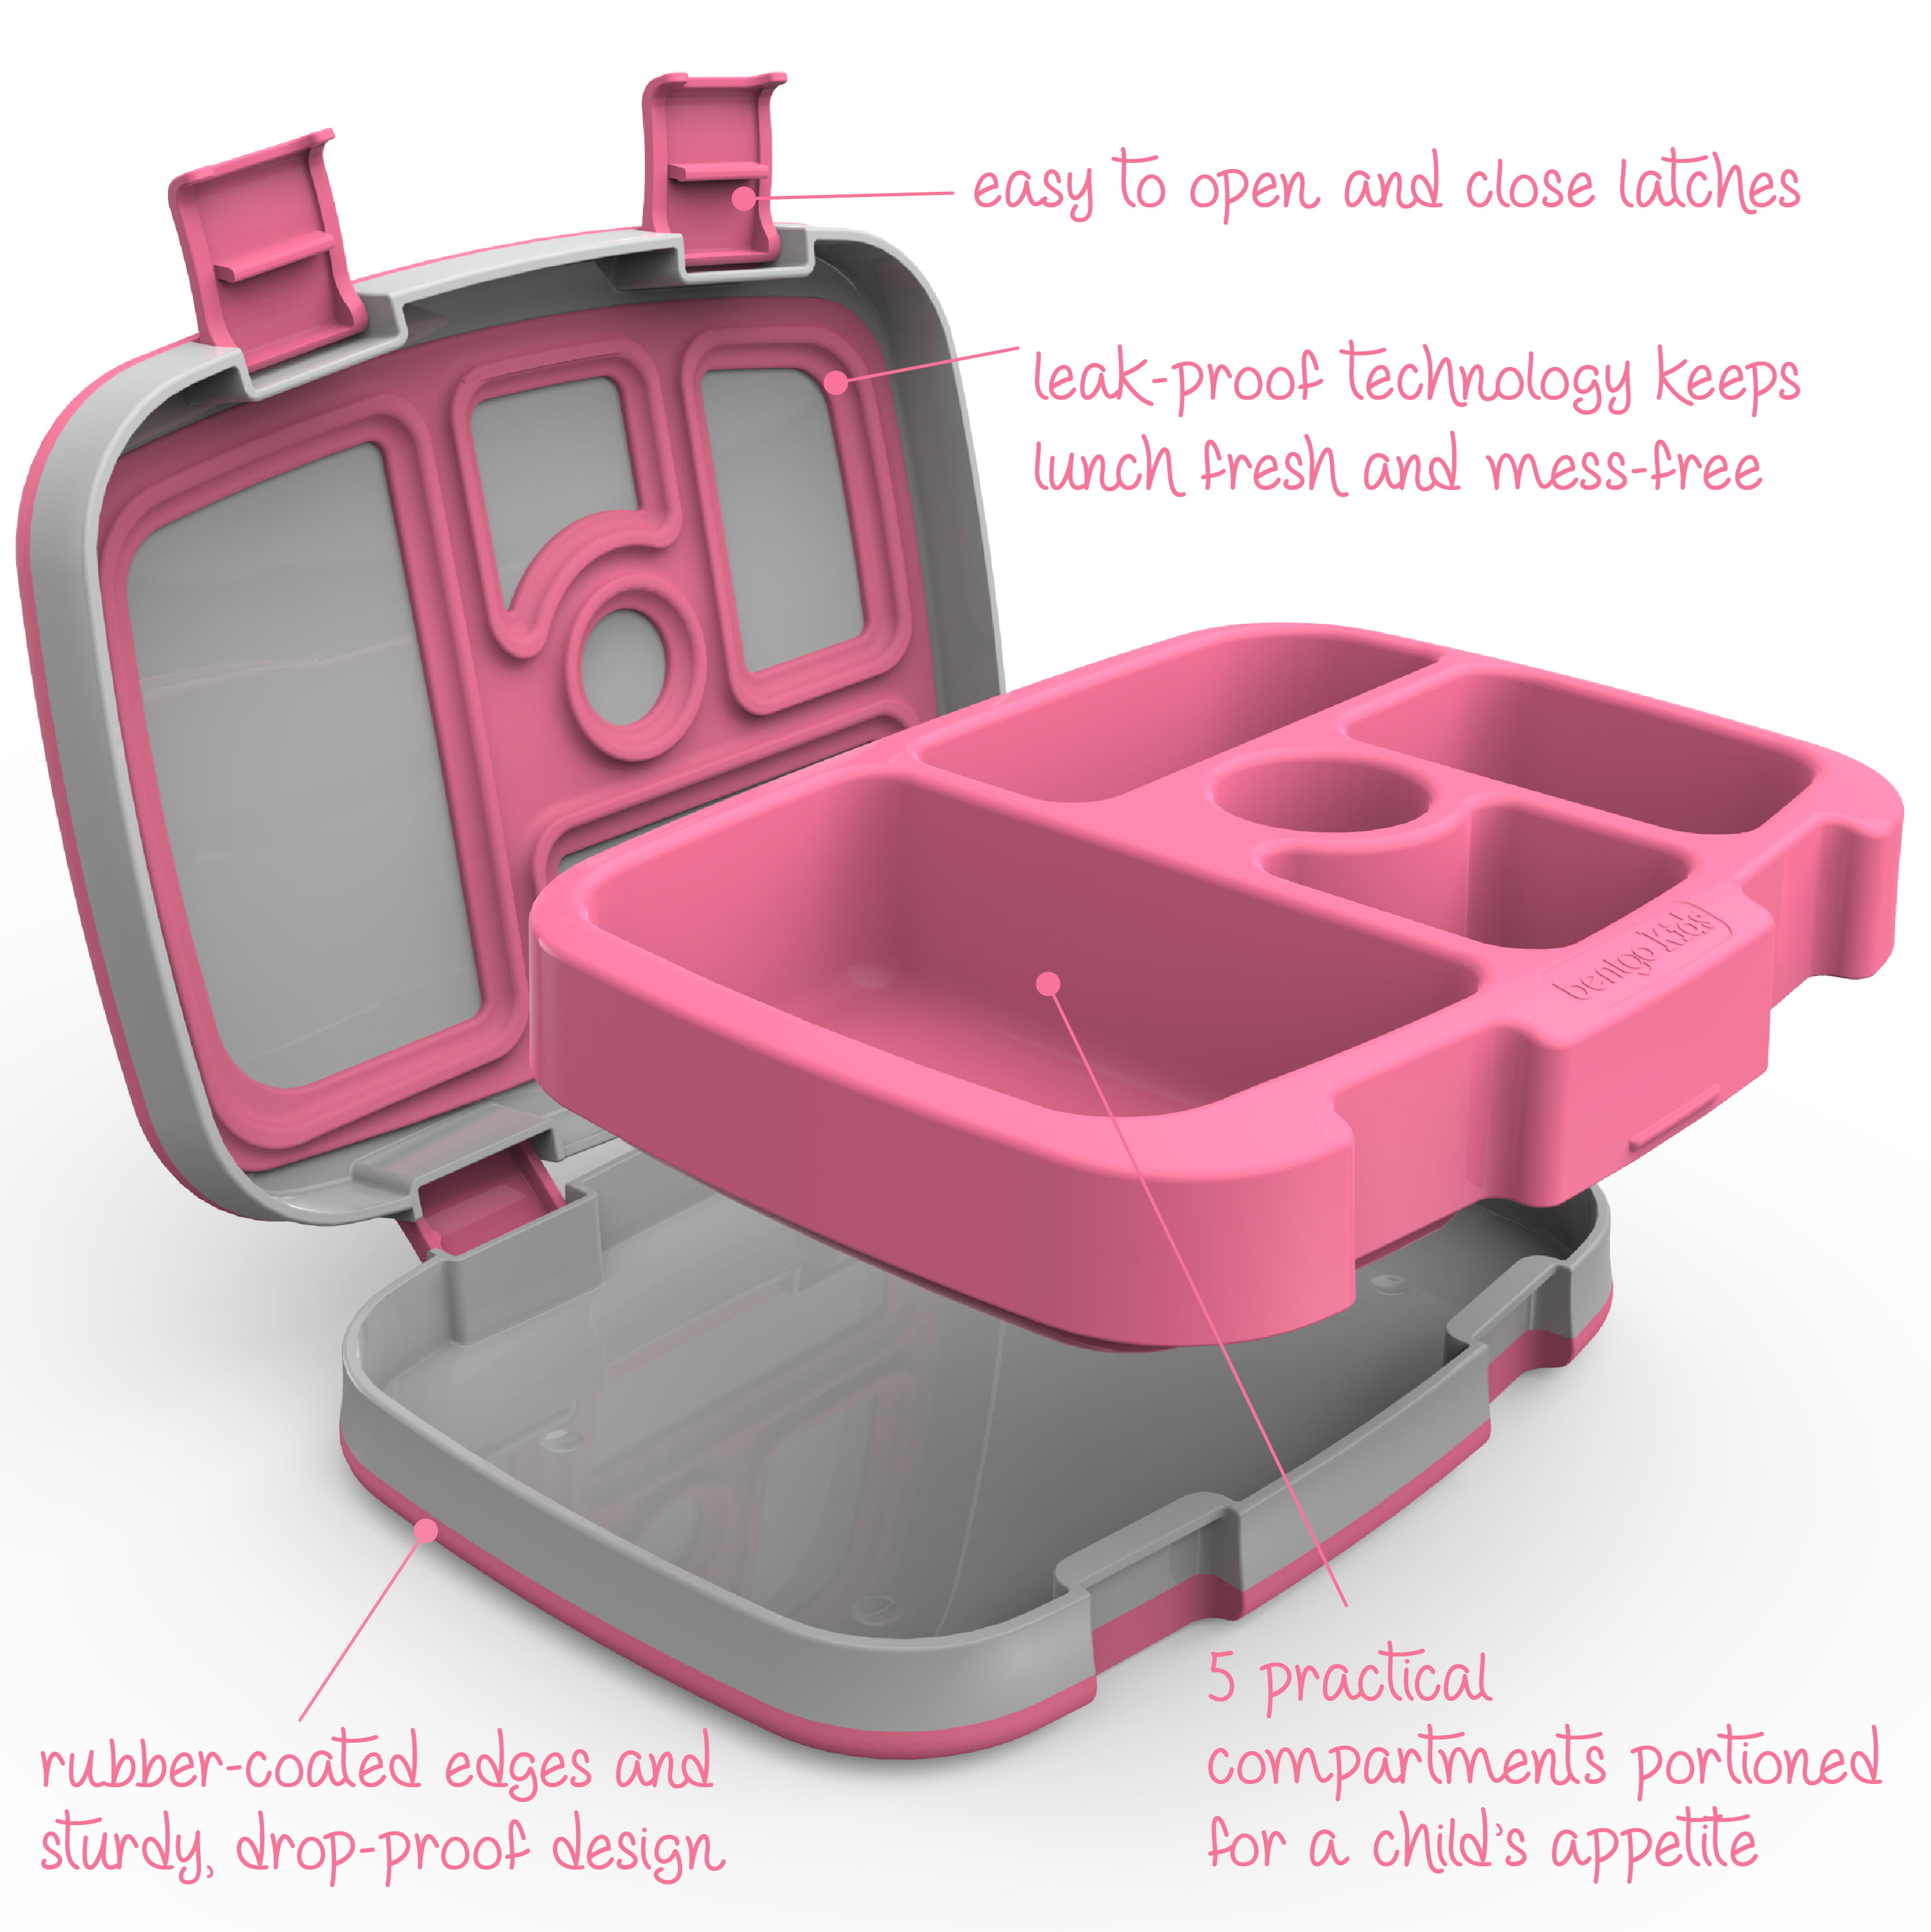  TIME4DEALS Stainless Steel Bento Lunch Box, Pink,  5-Compartment, Leak-Proof, 1000ML/34OZ, Ideal for Kids and Adults,  BPA-Free: Home & Kitchen